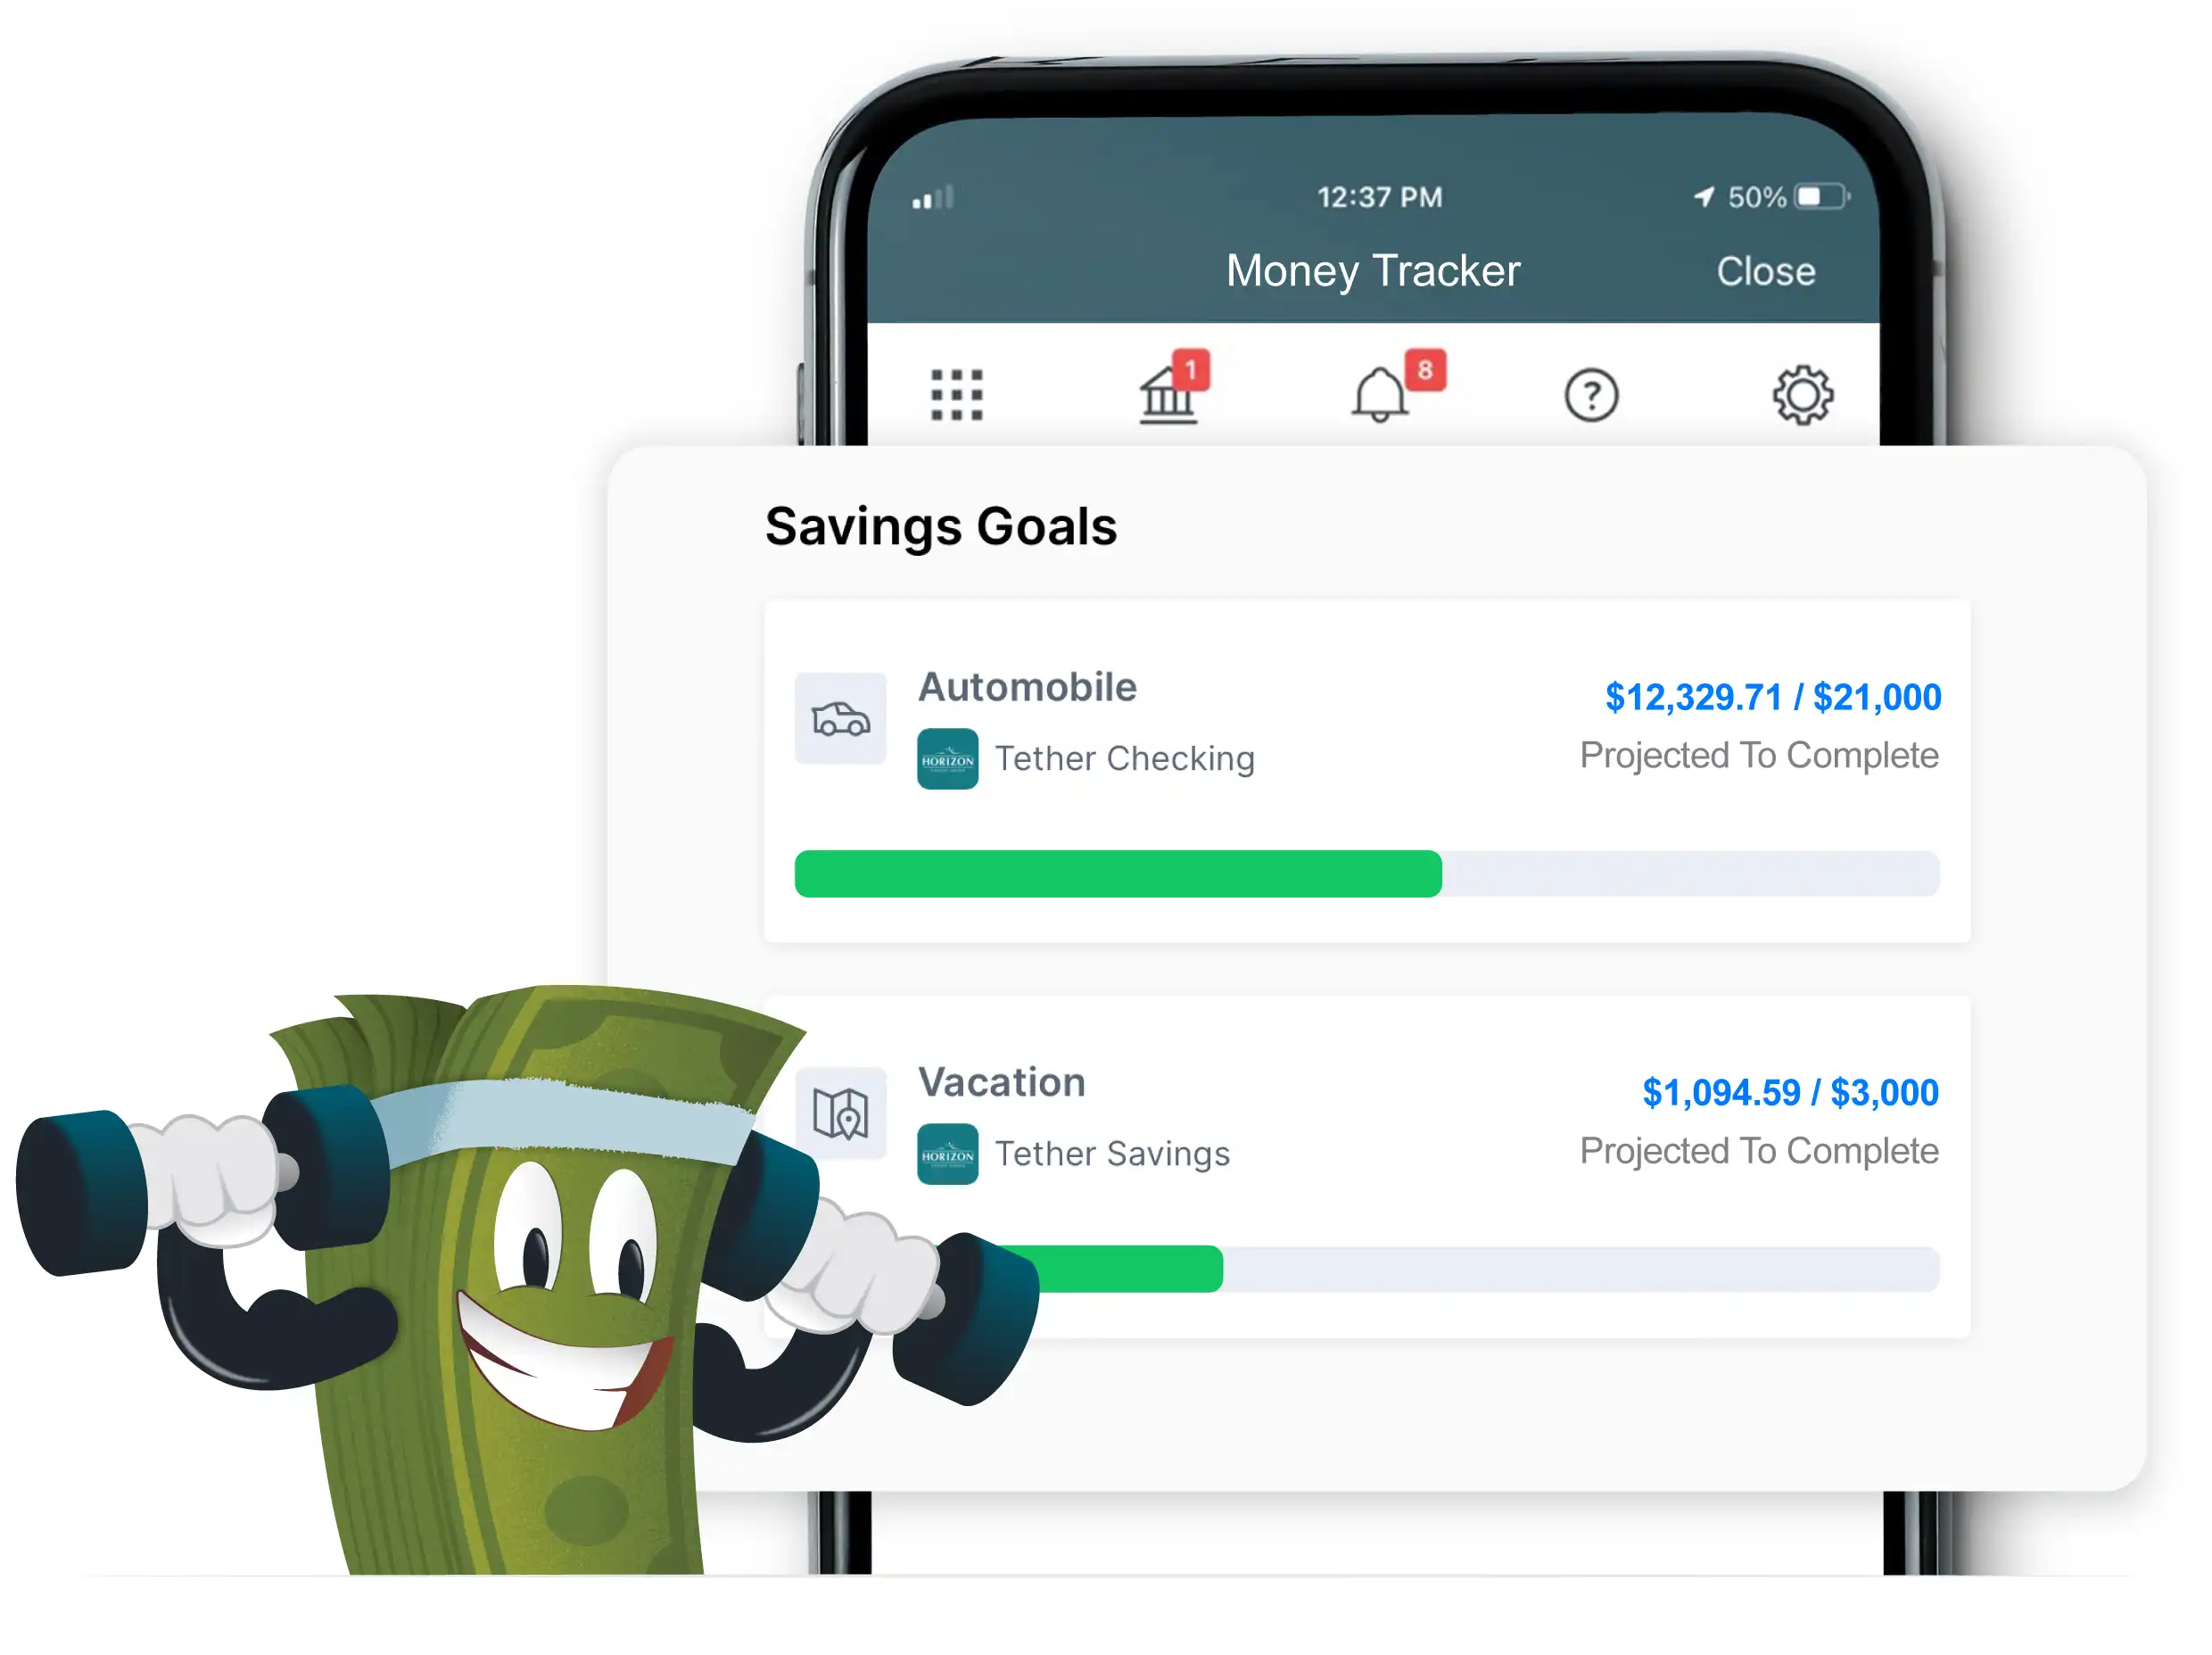 Image of money tracker goals and their progress bars with a money character lifting weights above his head.